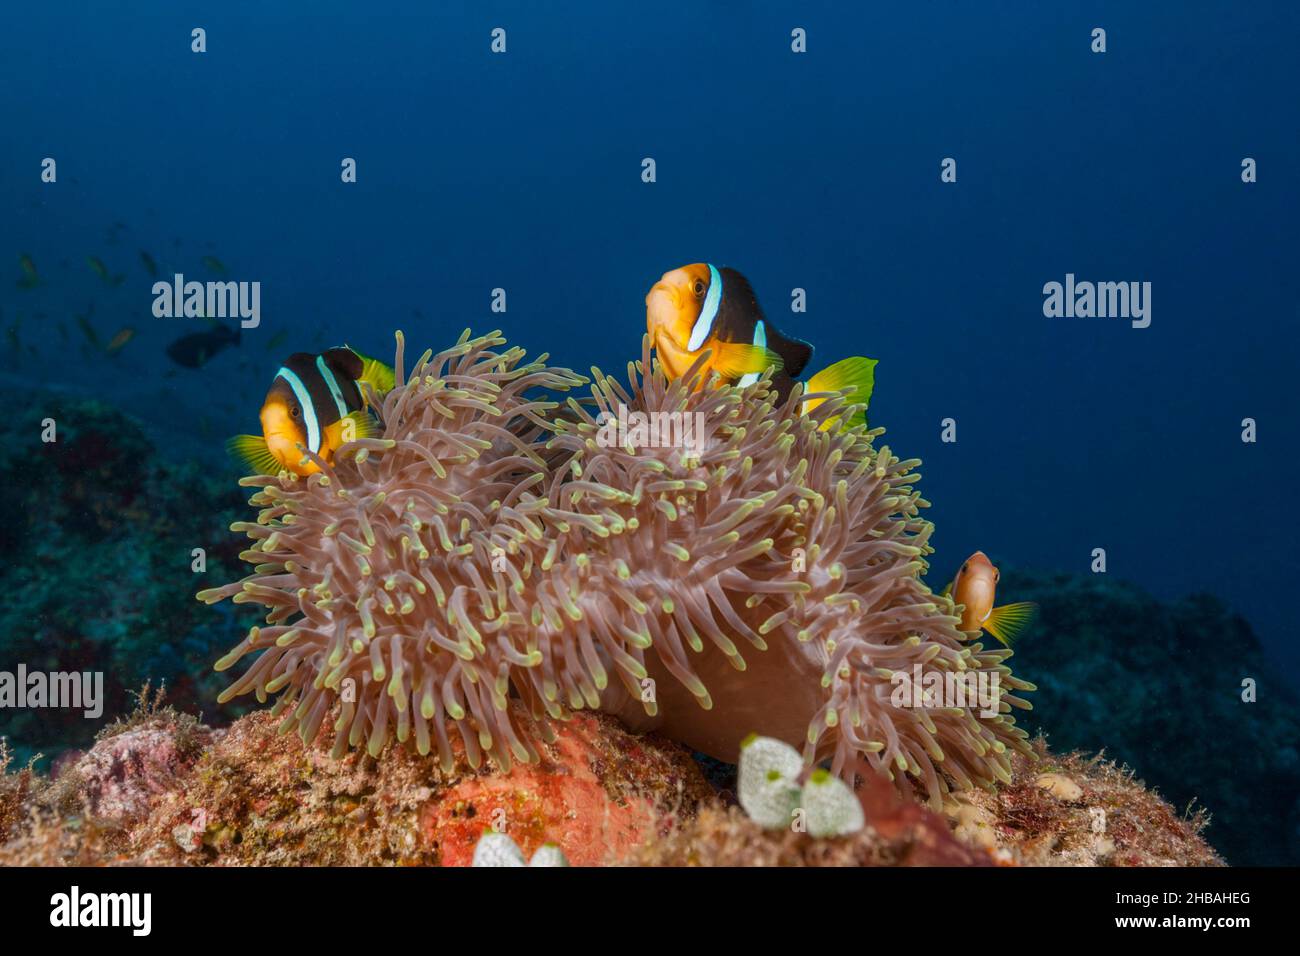 Clarks Anemonefish, Amphiprion clarkii, Nord-Male-Atoll, Indischer Ozean, Malediven Stockfoto